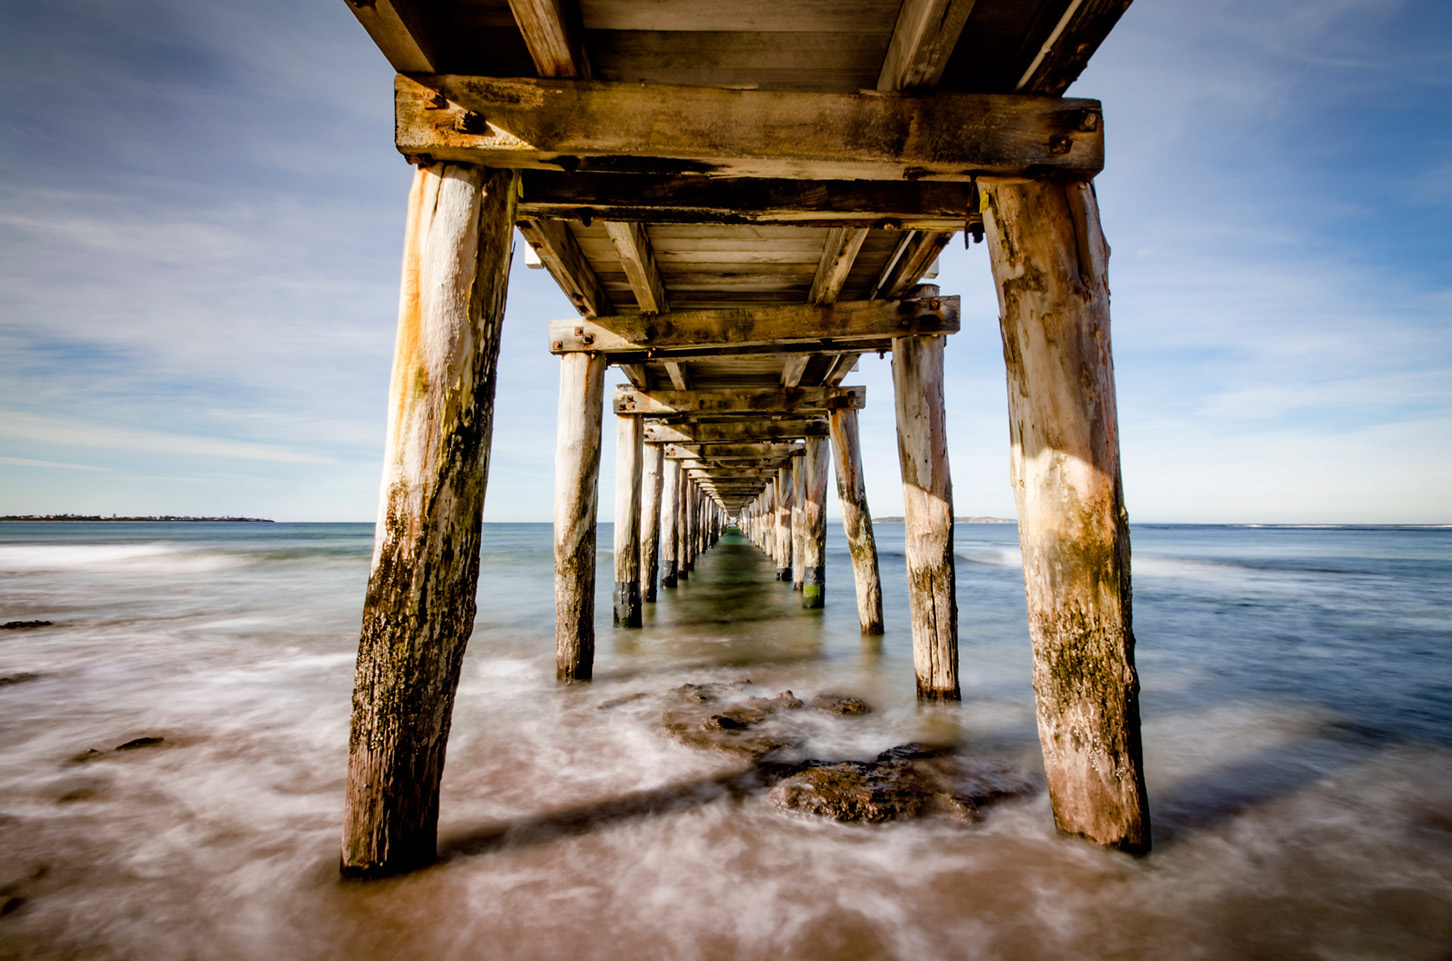 Underneath the Jetty 2